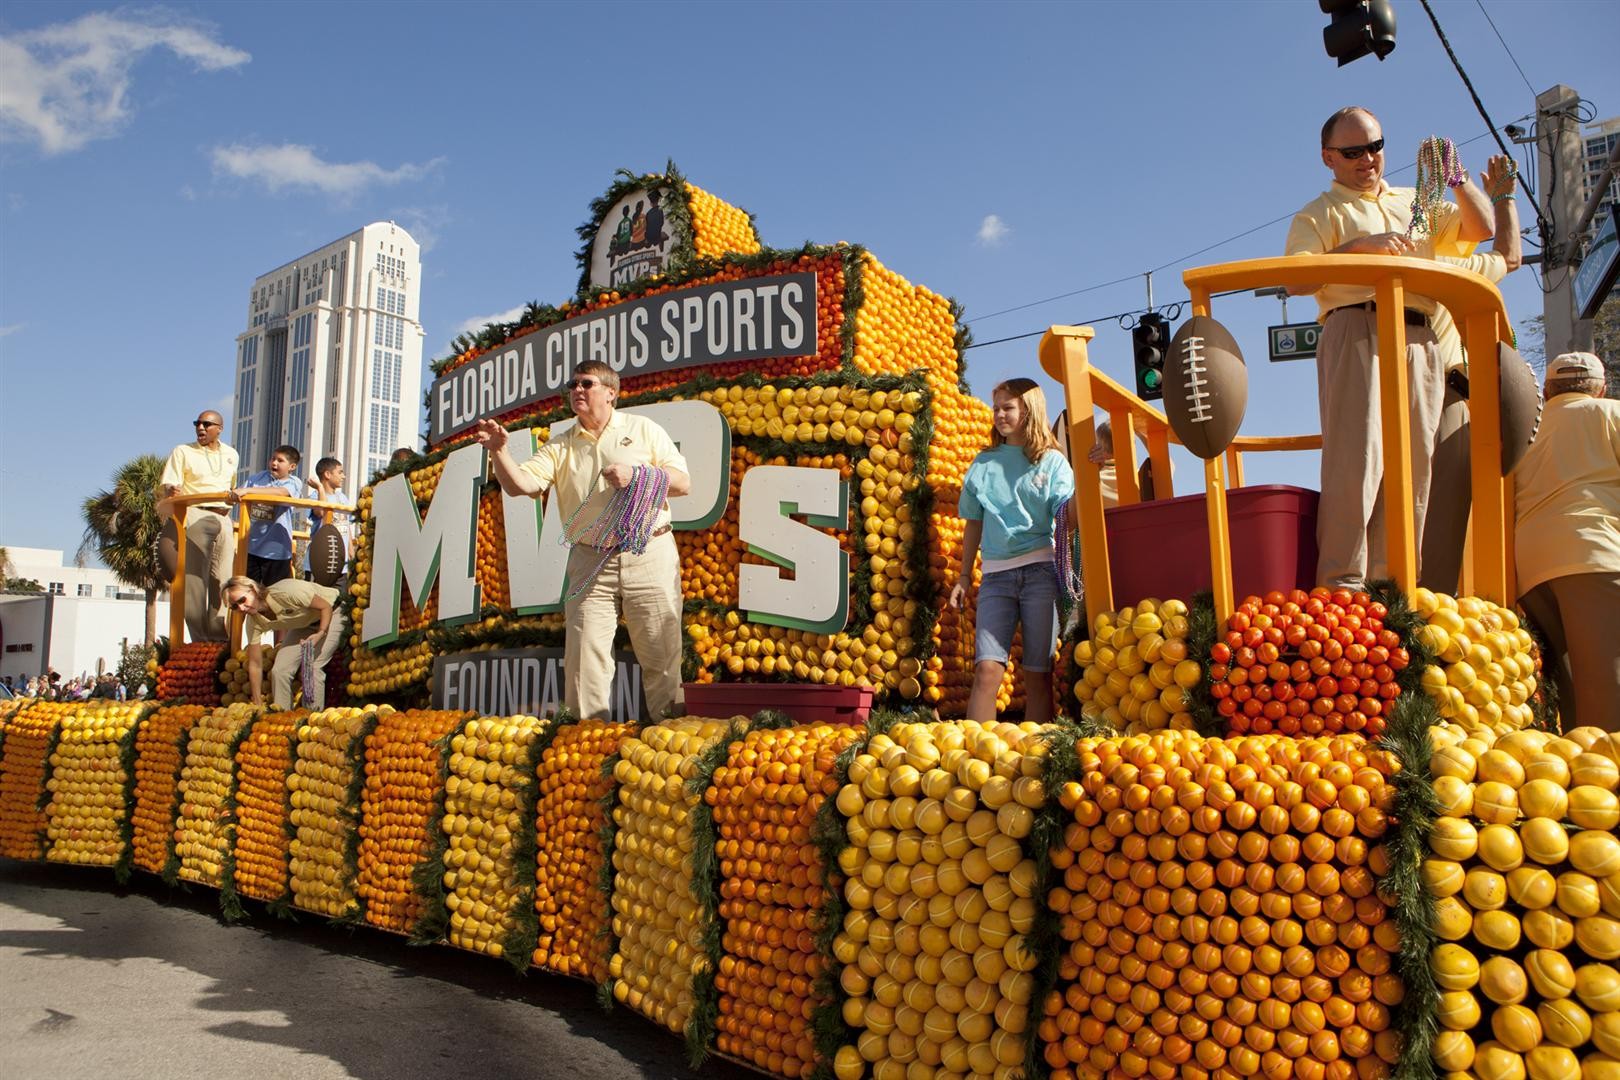 Over a mile of orangethemed floats will invade downtown Orlando for